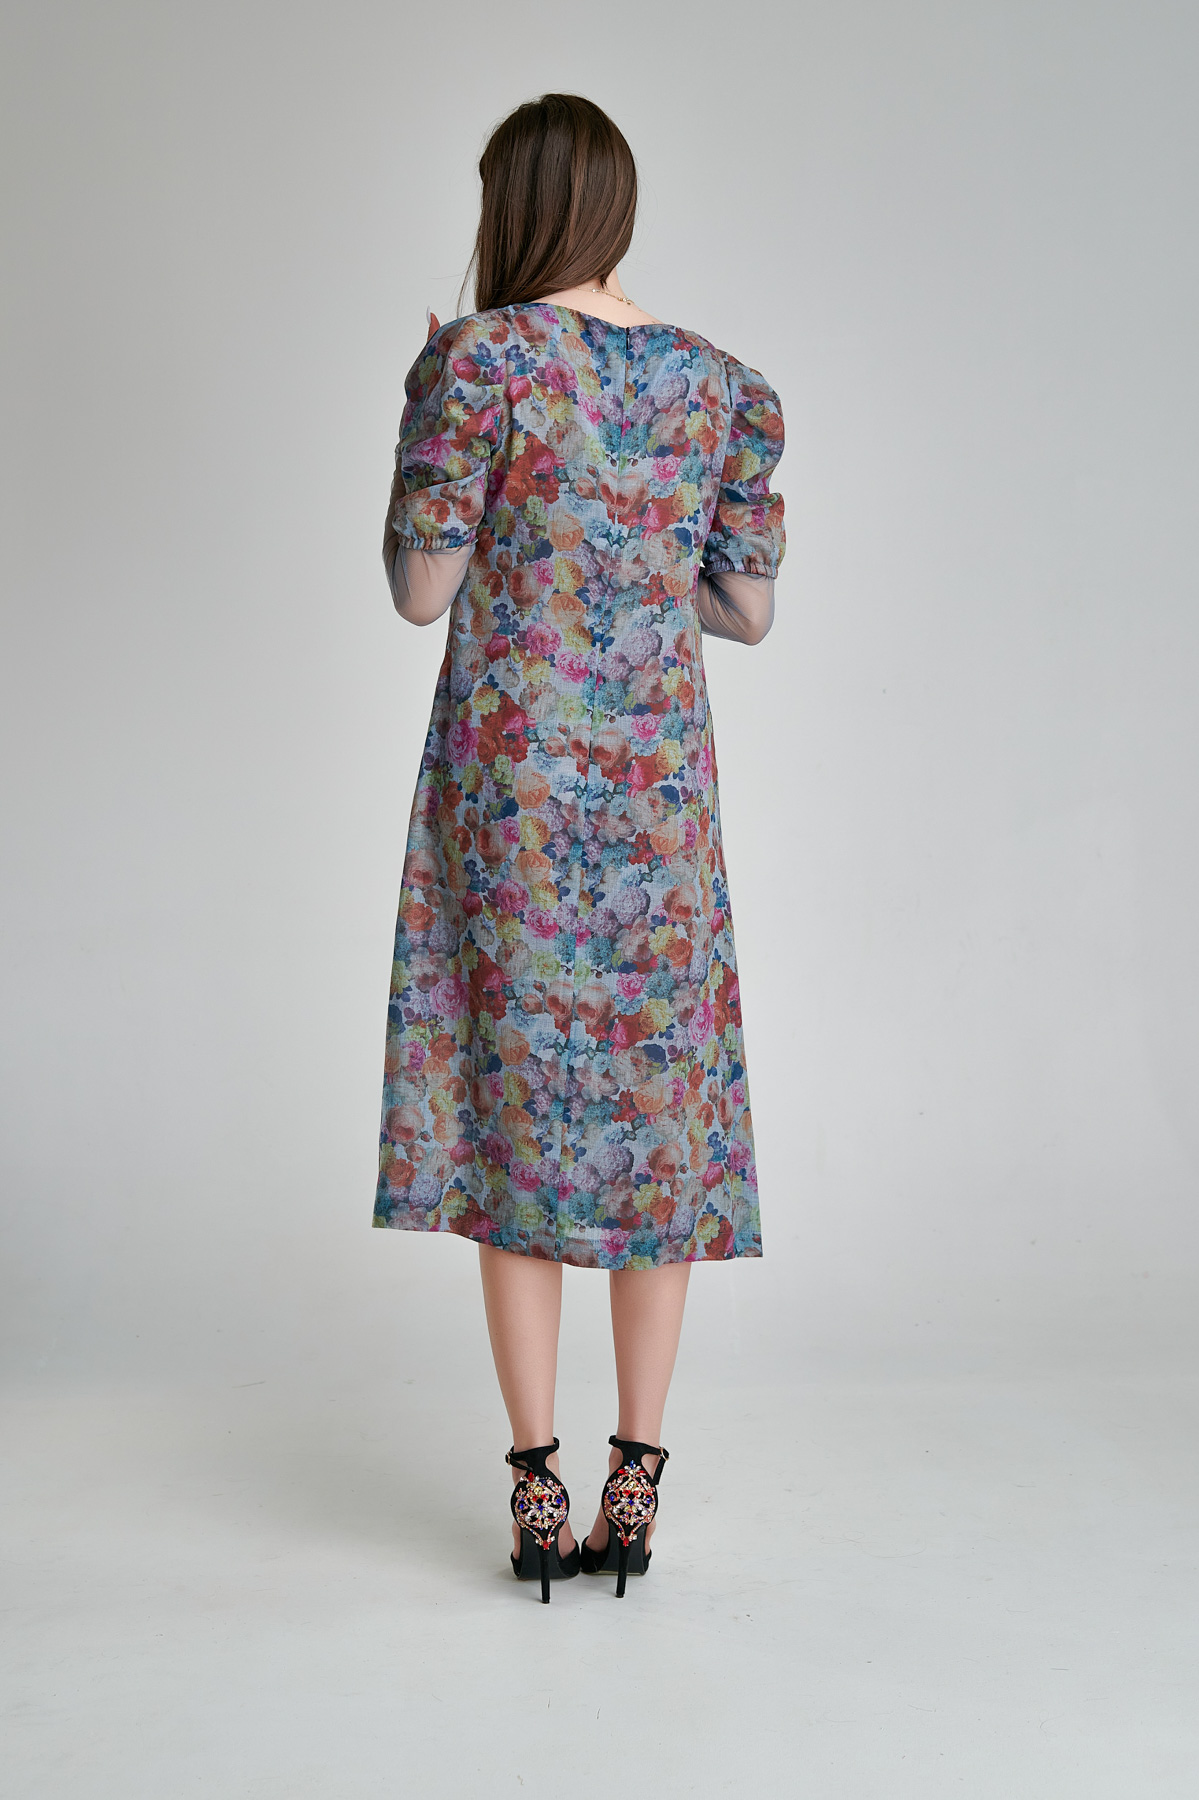 Elegant floral DARIA dress with puffy sleeves and tulle gloves. Natural fabrics, original design, handmade embroidery